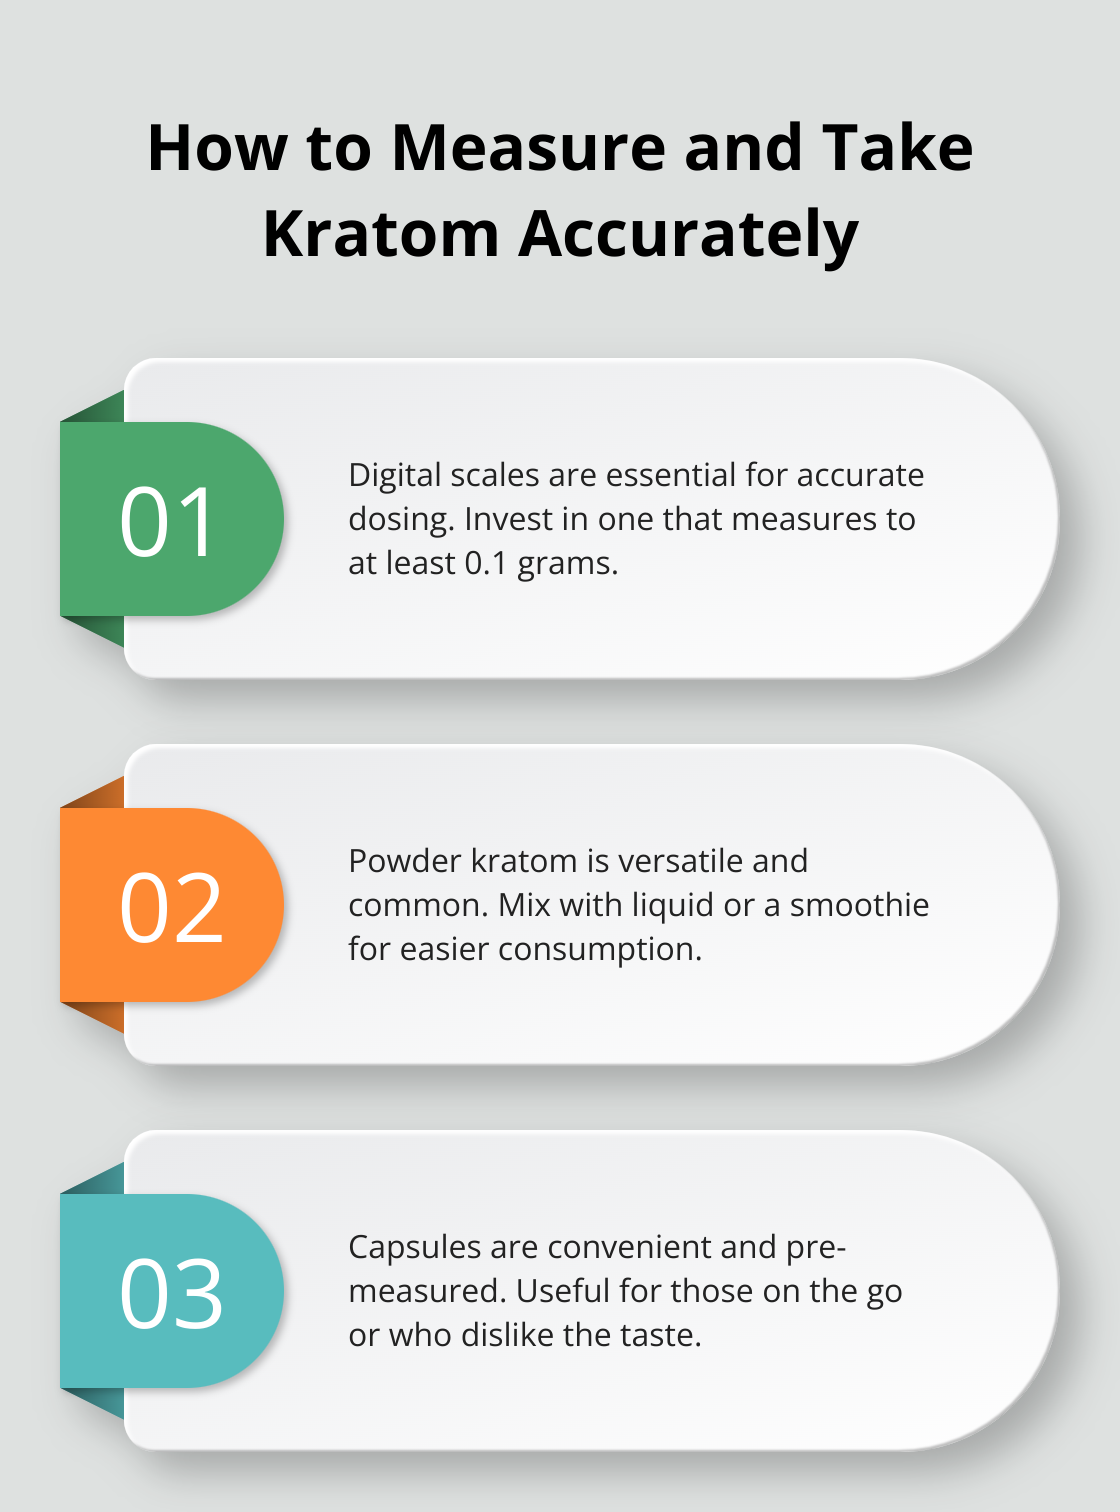 Fact - How to Measure and Take Kratom Accurately